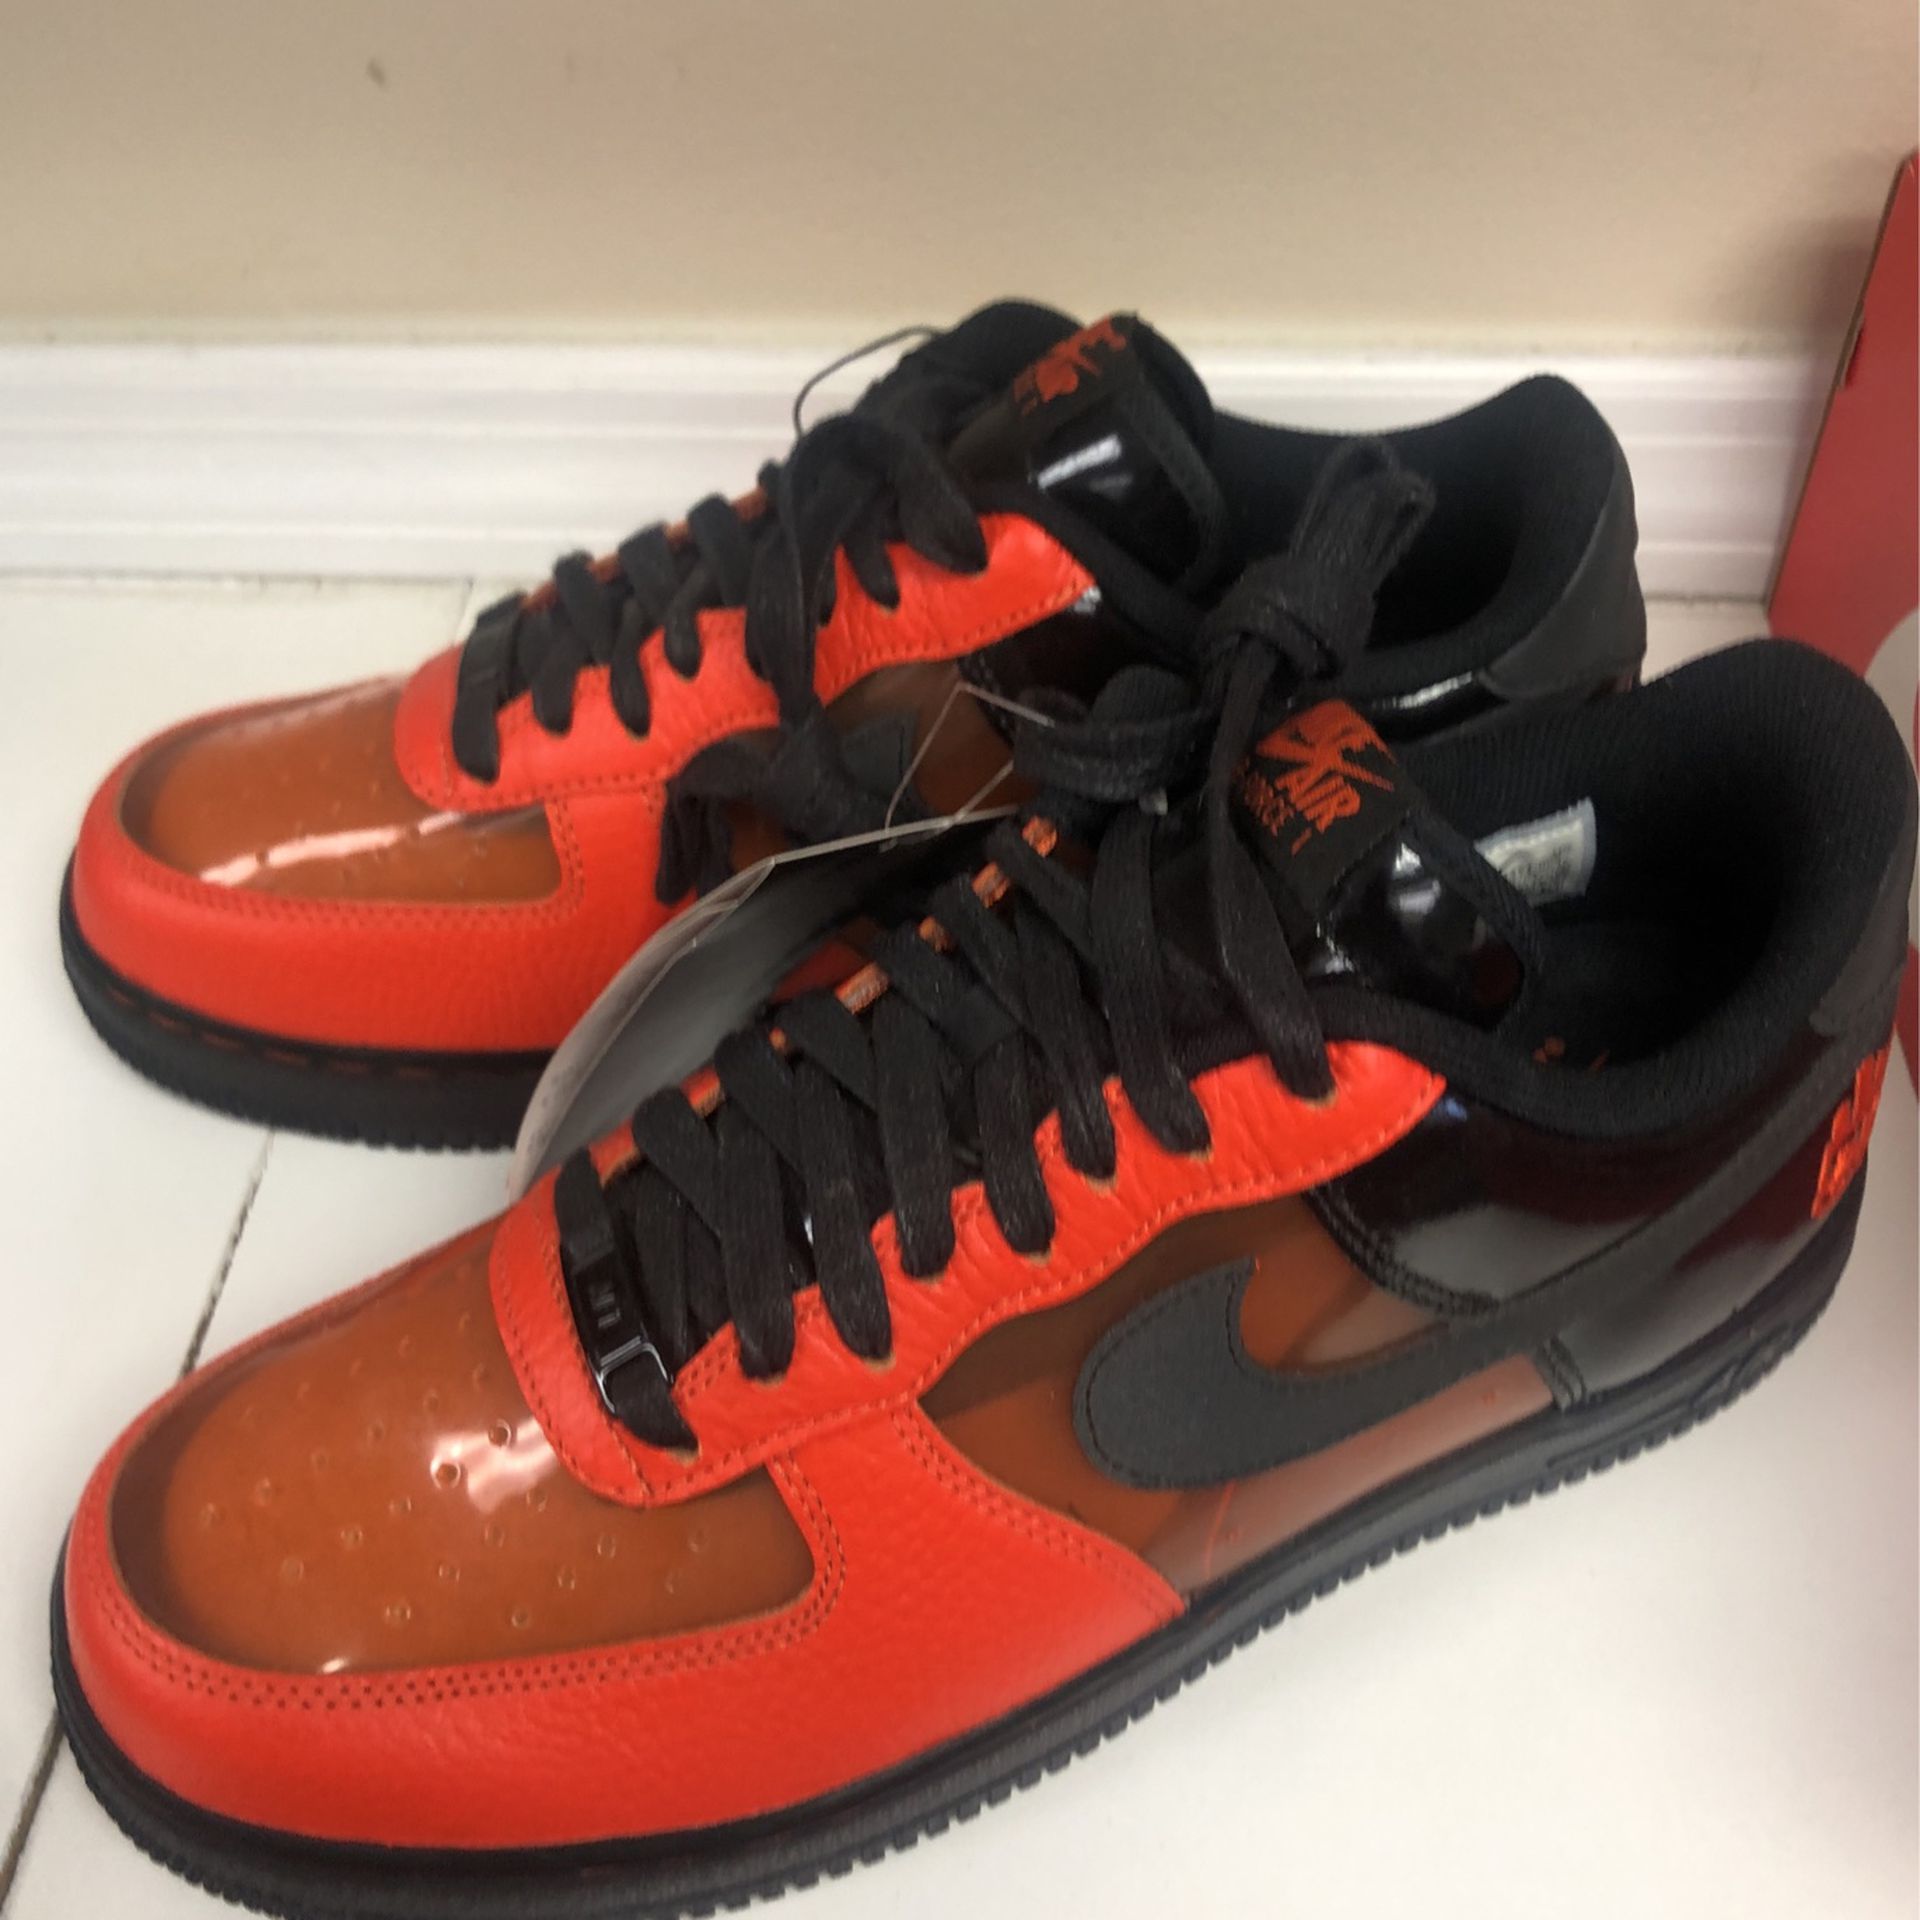 Nike Air force One Worldwide for Sale in Bronx, NY - OfferUp